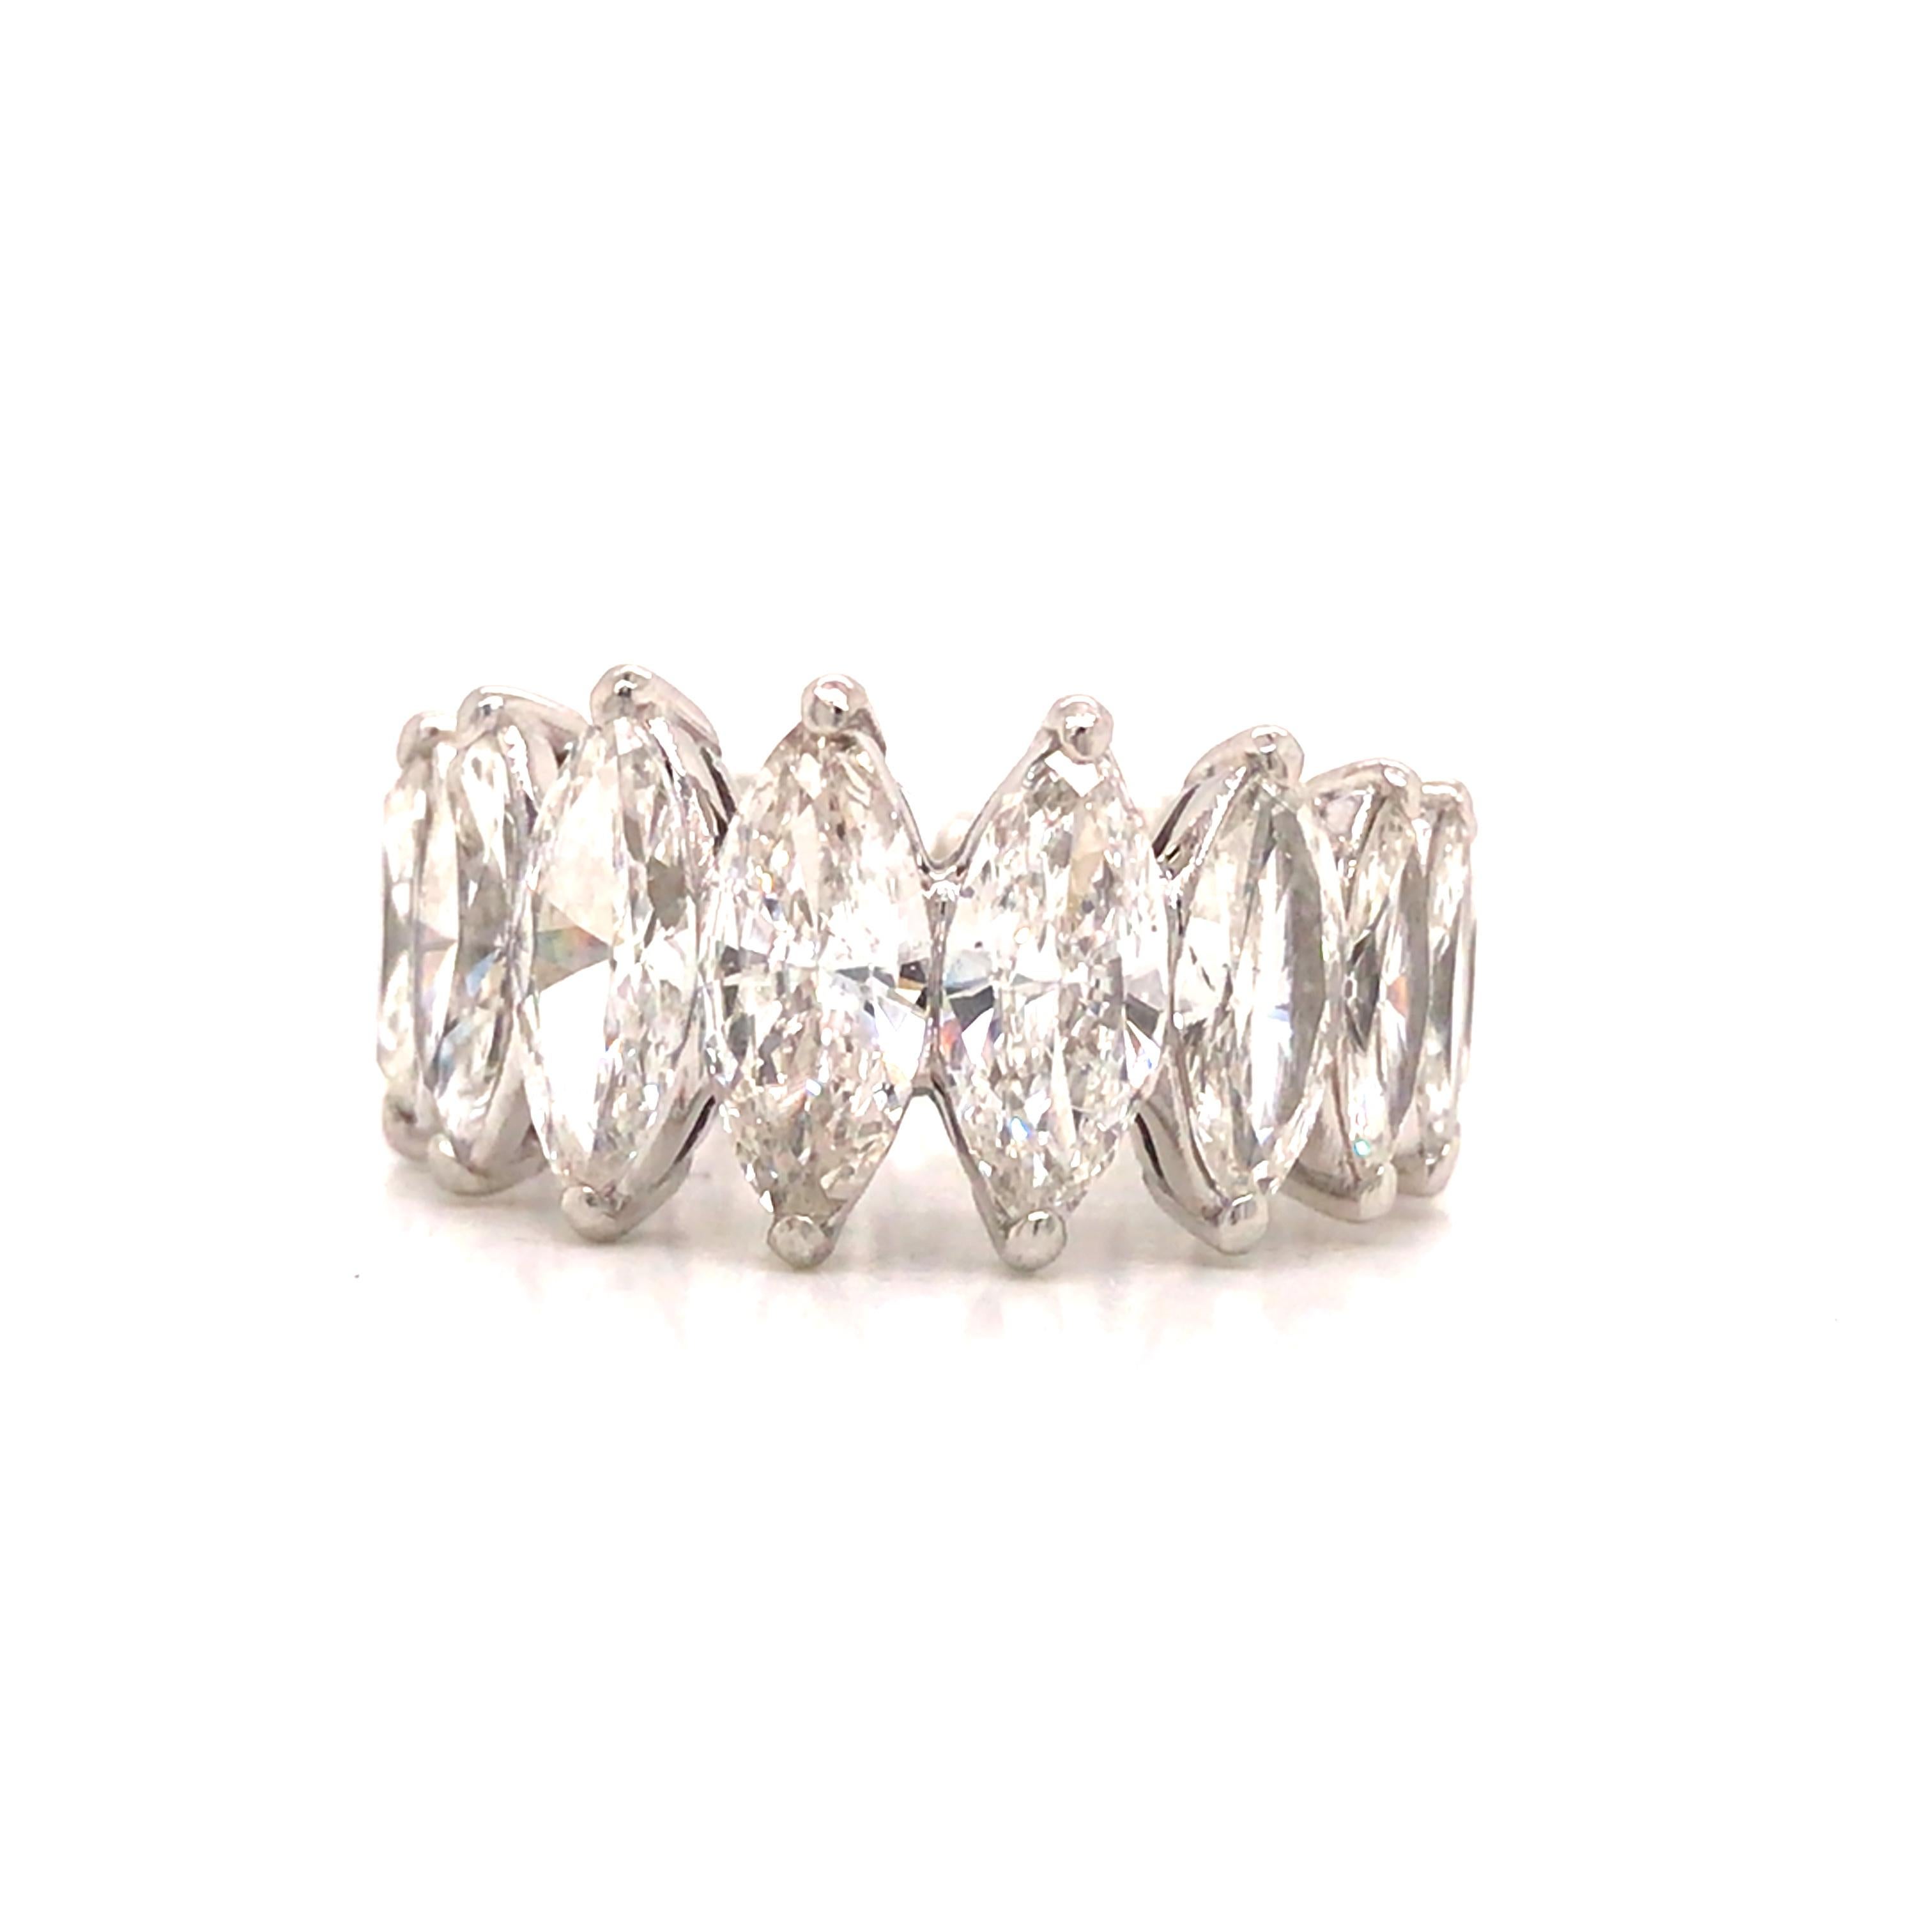 Marquise Diamond Eternity Band in Platinum.  Marquise Diamonds weighing 9.03 carat total weight, G-H in color and VS in clarity are expertly set in graduation.  The Band measures 3/8 inch in width.  Ring size 6. 9.17 grams.